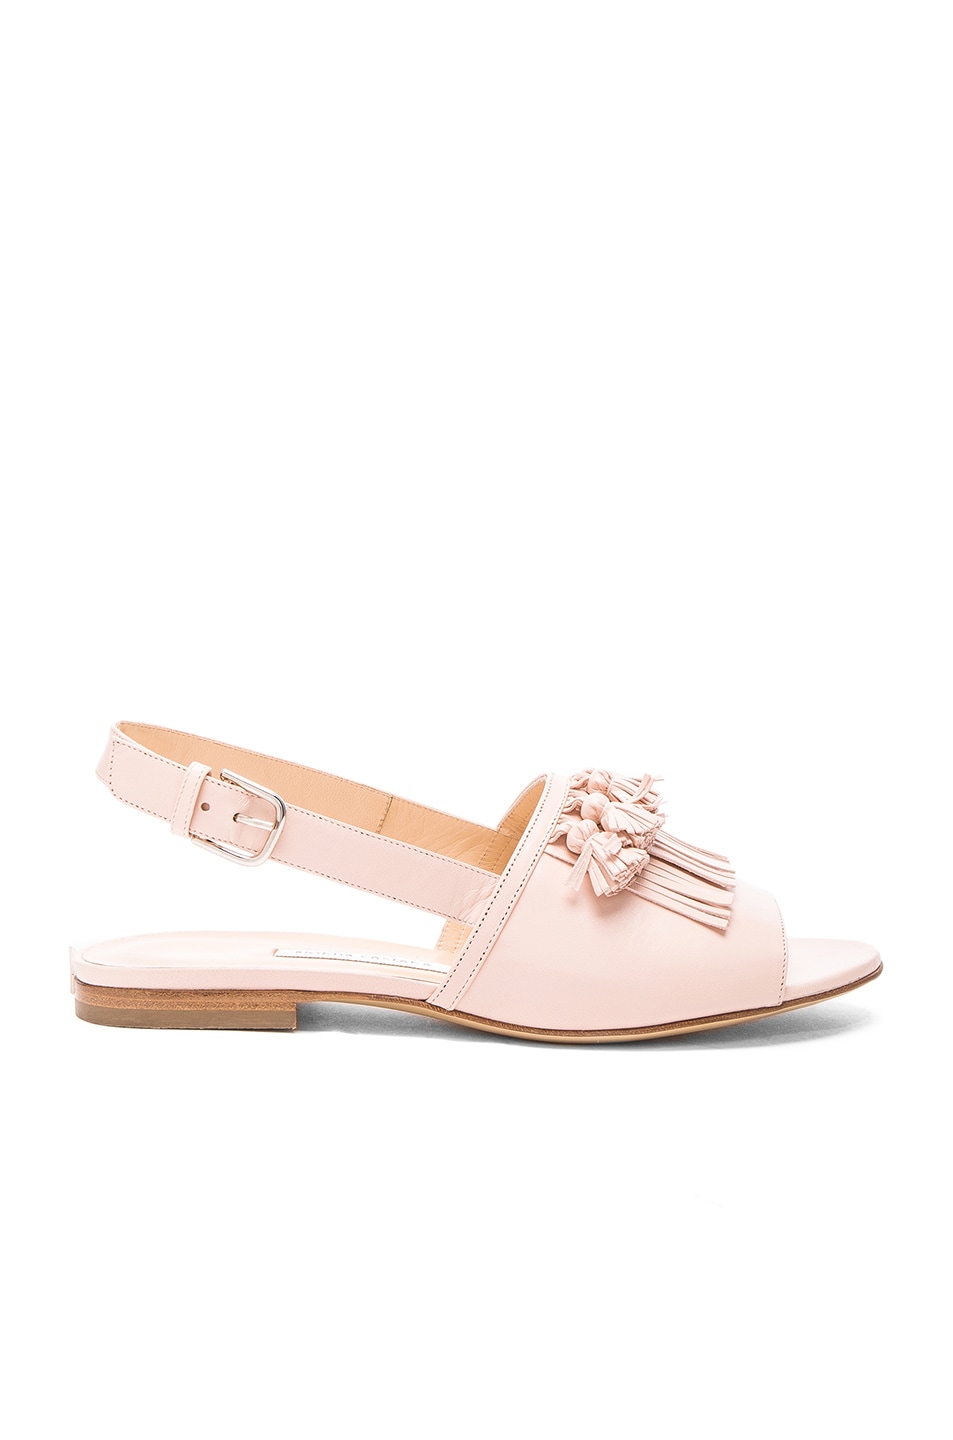 Image 1 of Bionda Castana Leather Aian Sandals in Blush